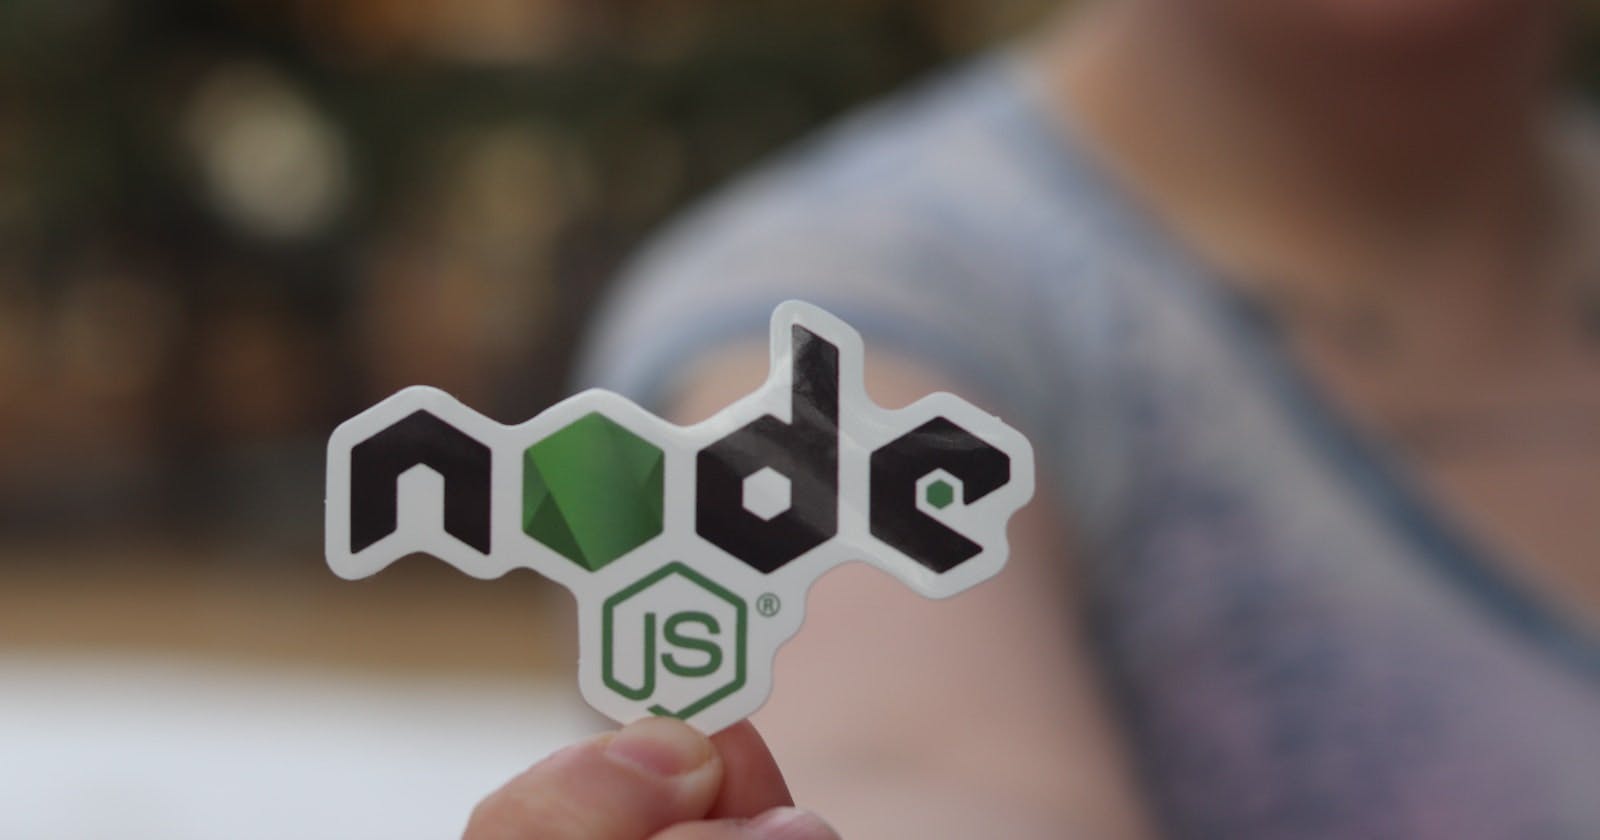 Node.js To The Moon 🚀